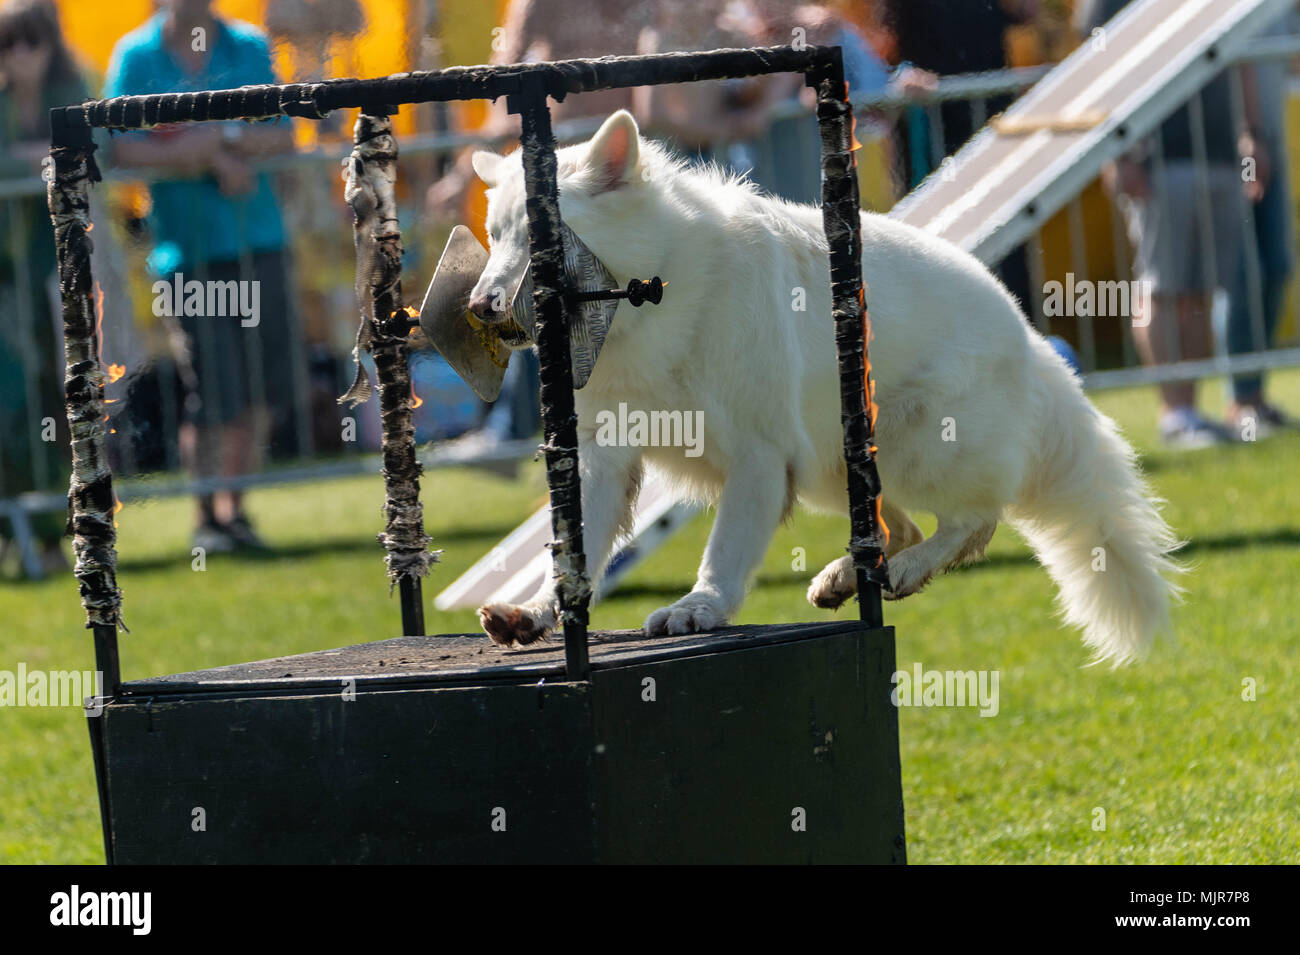 Brentwood, Essex 6th May 2018 A dog jumps through beringurning hoops at the All about Dogs show, Brentwood, Essex, Credit Ian Davidson/Alamy Live News Stock Photo